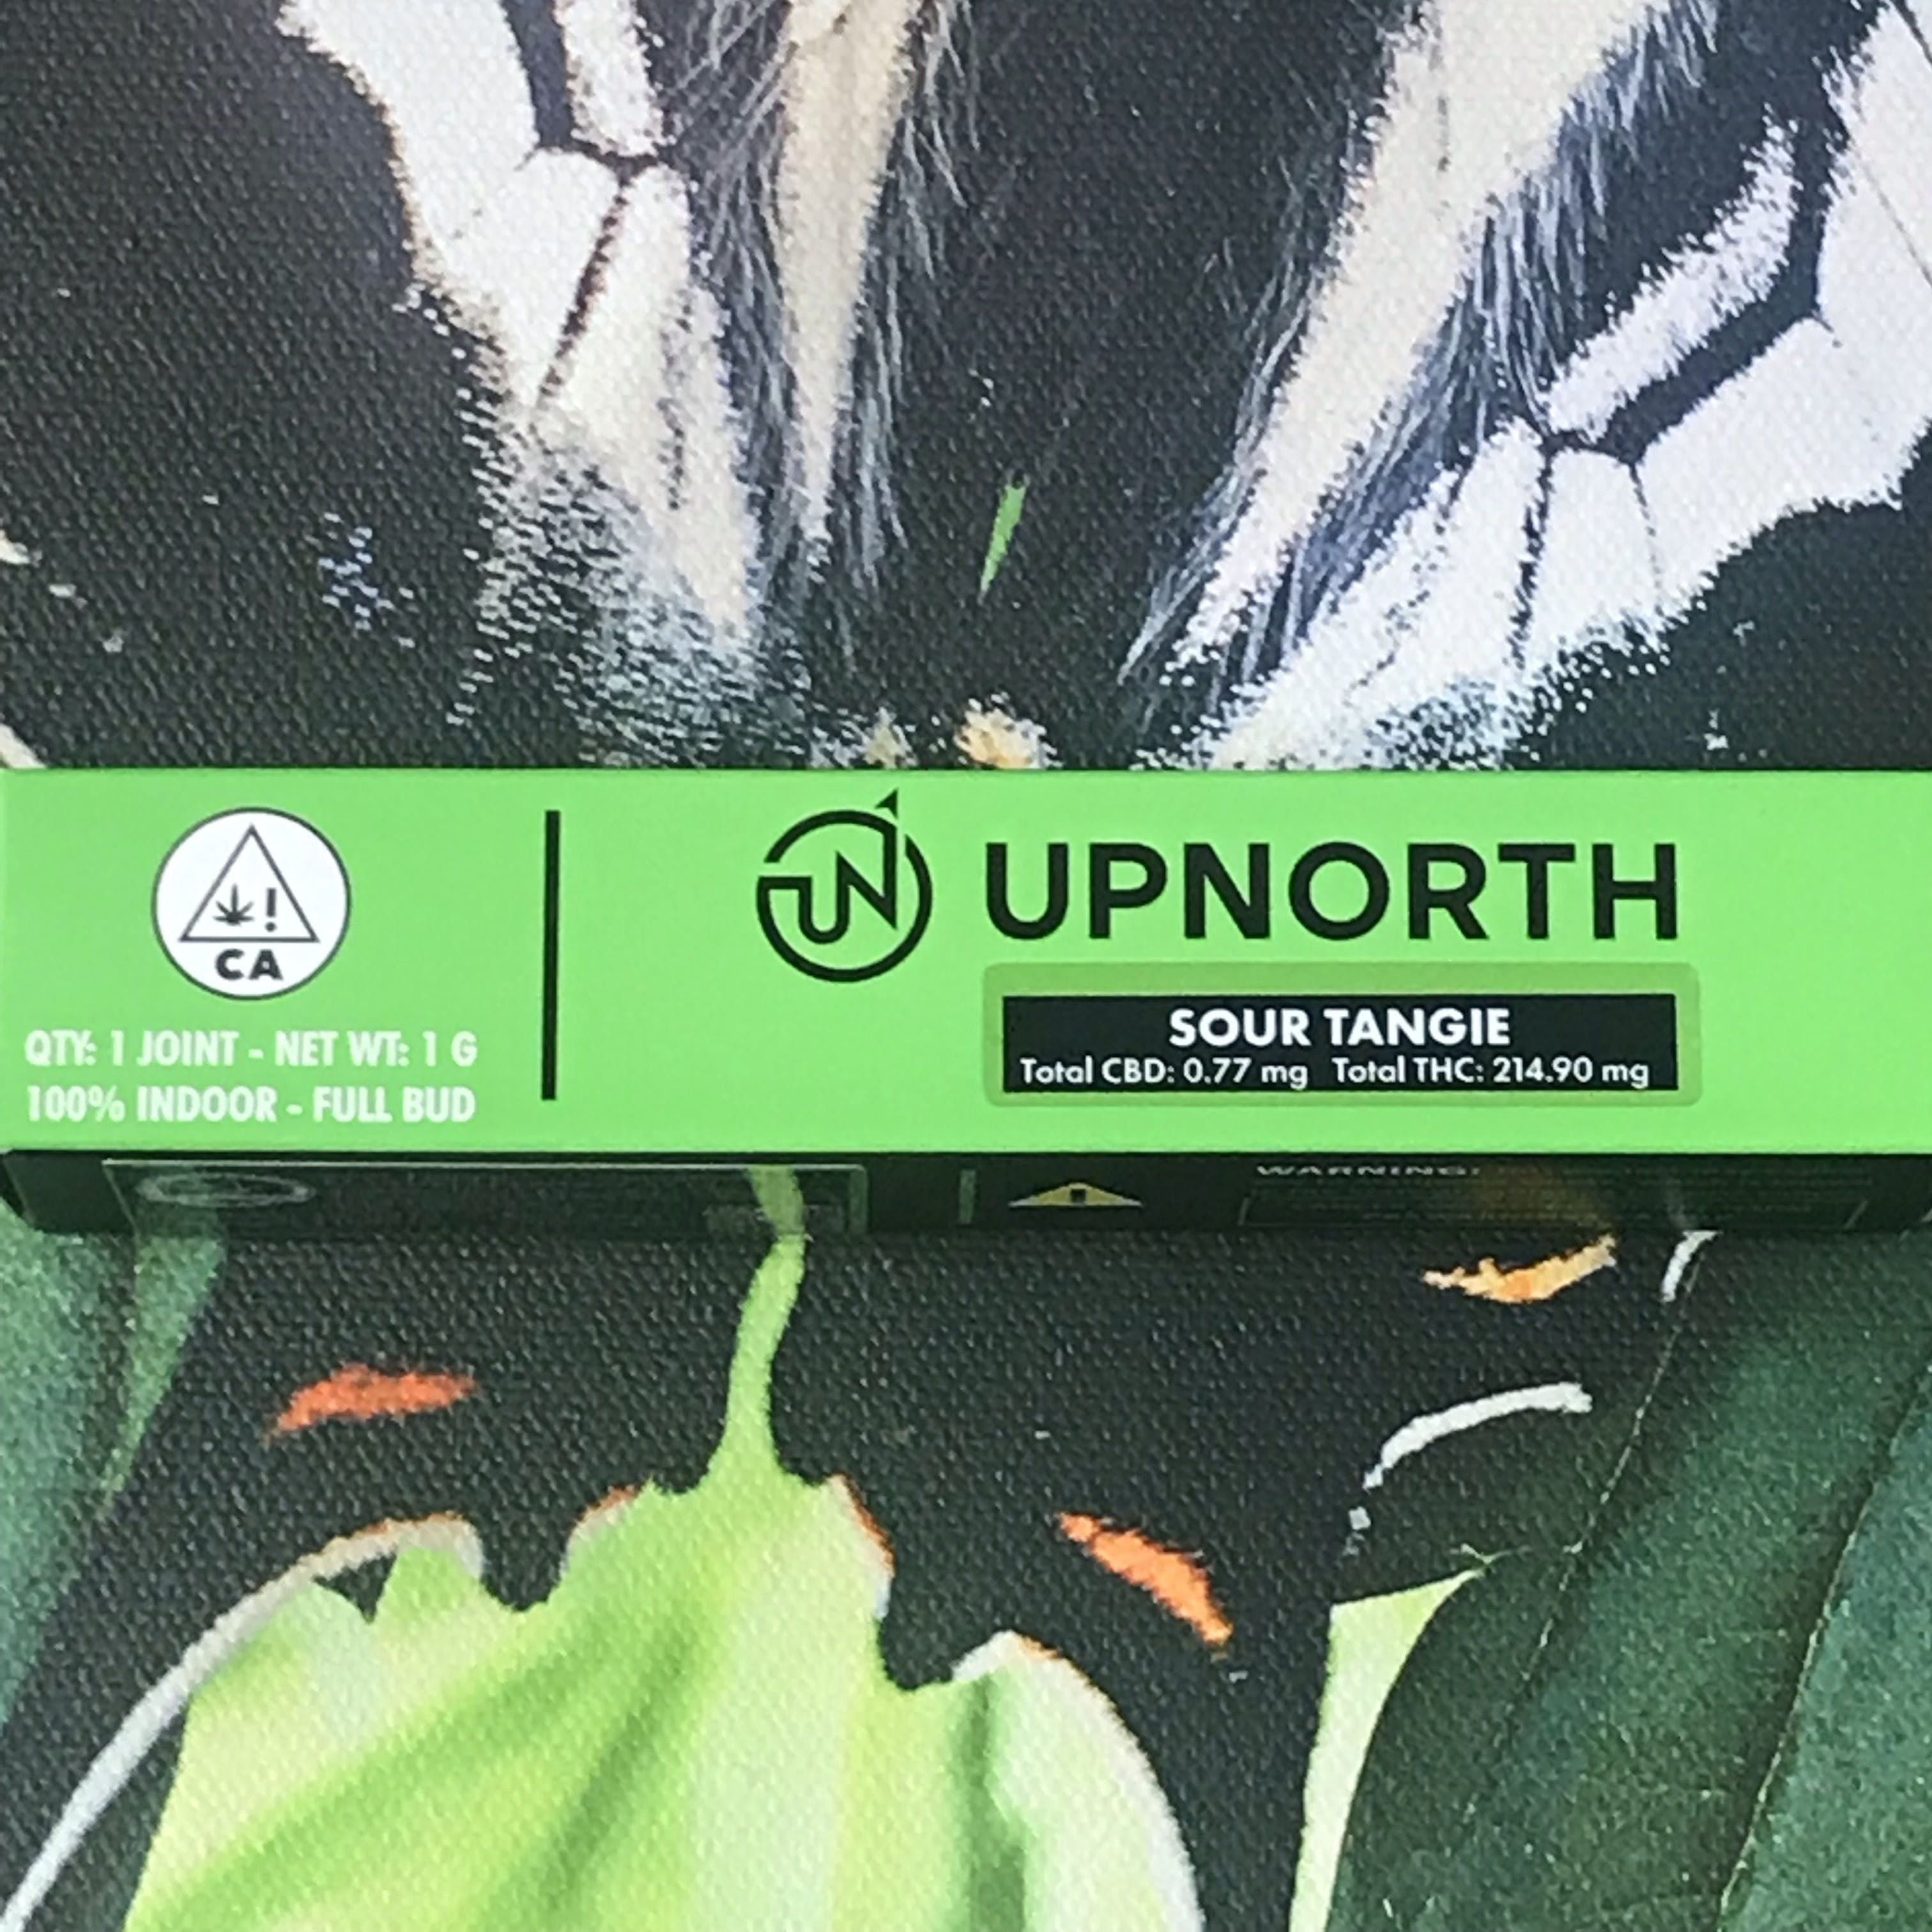 UpNorth Sour Tangie preroll